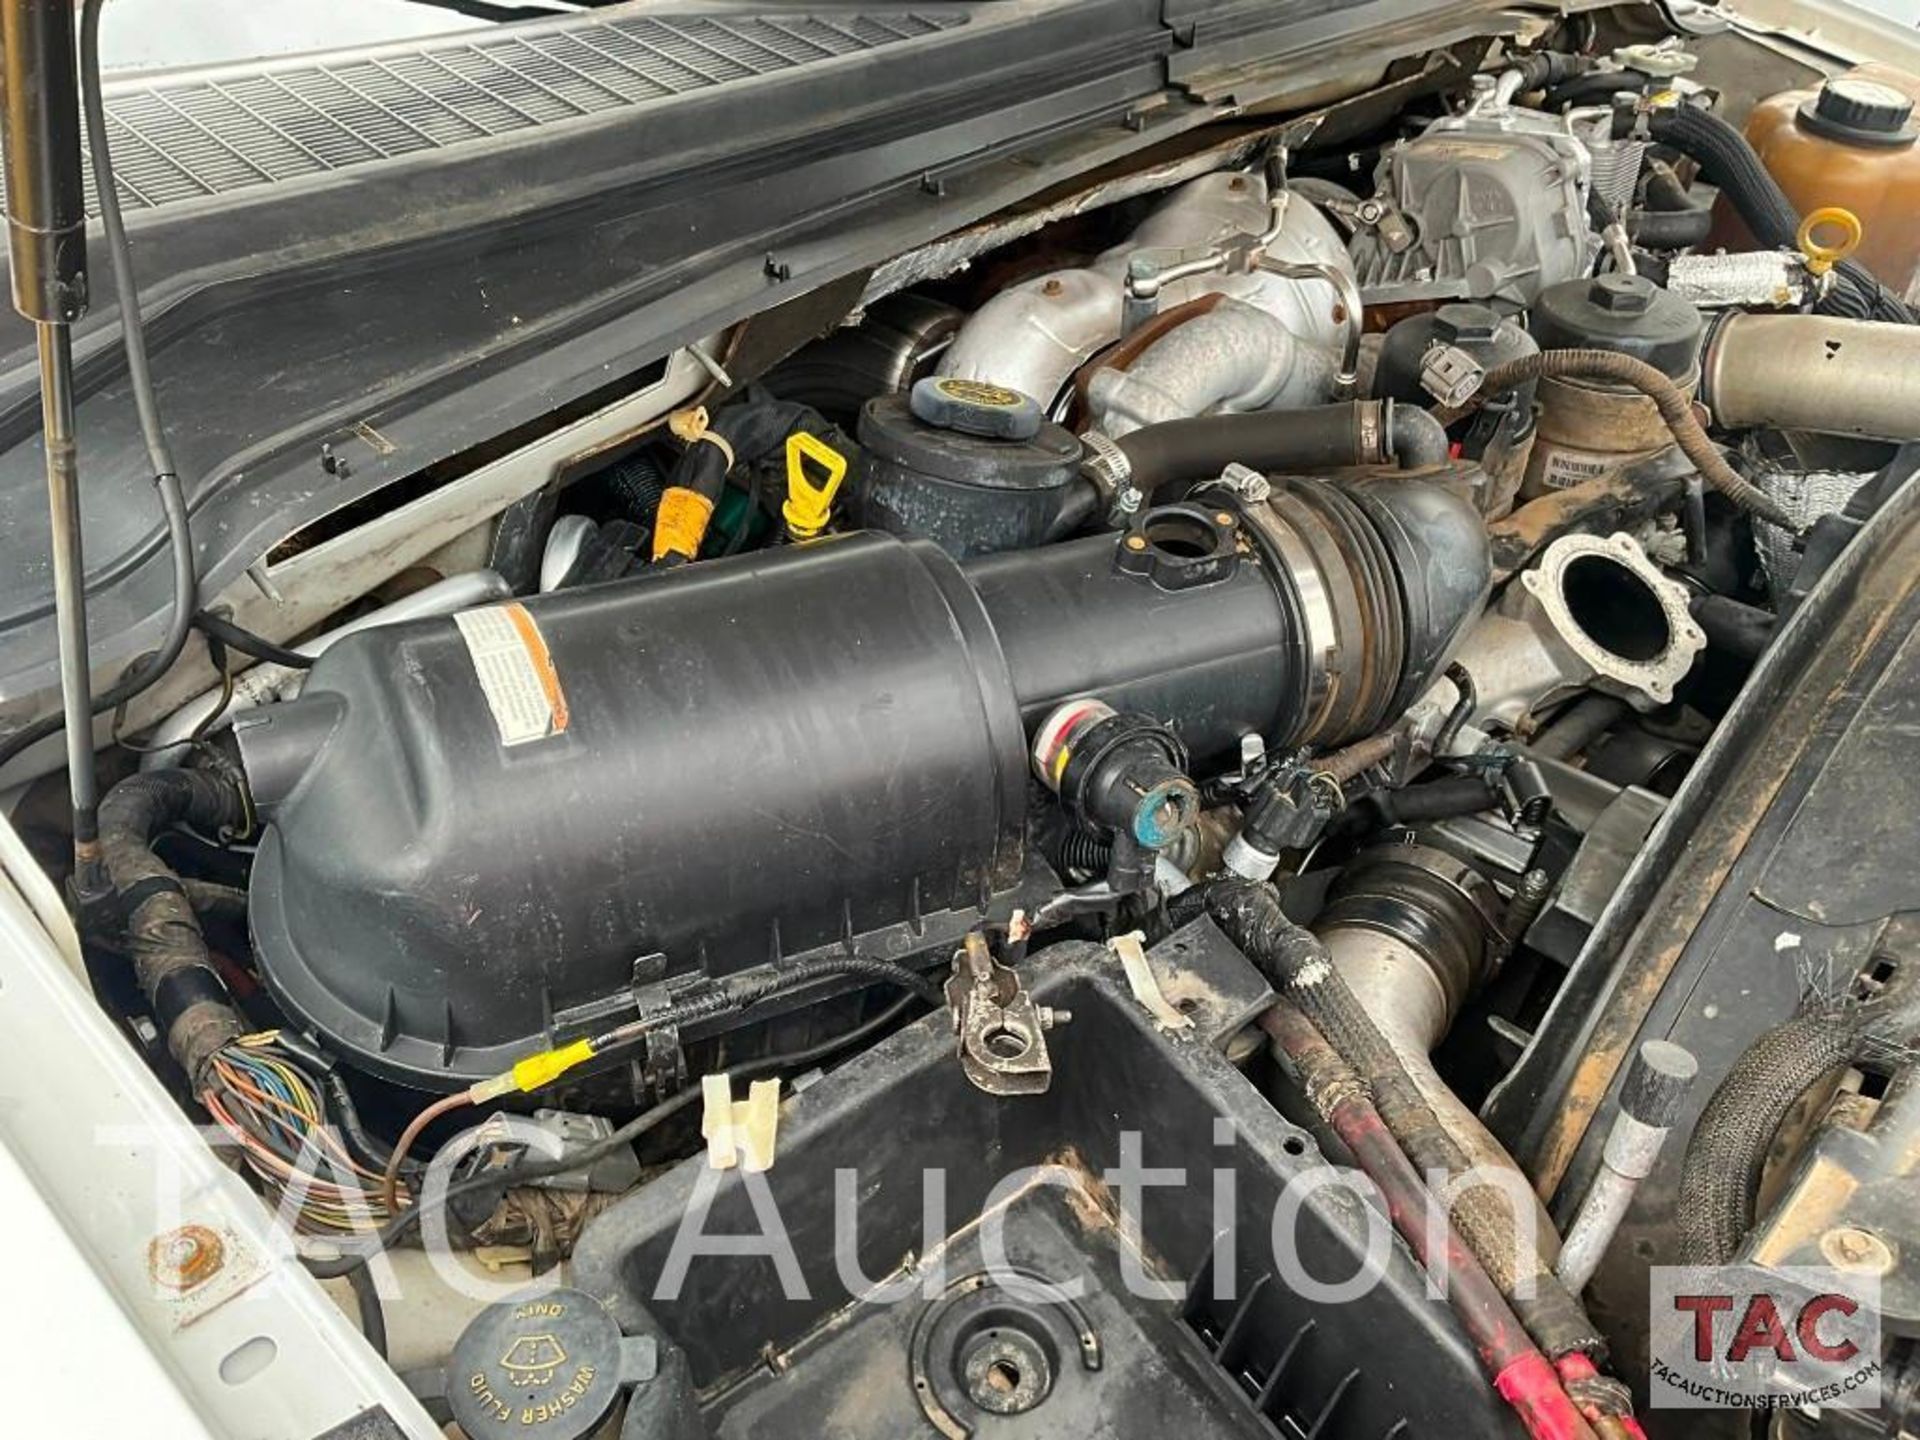 2008 Ford F-350 Super Duty Service Truck - Image 102 of 124